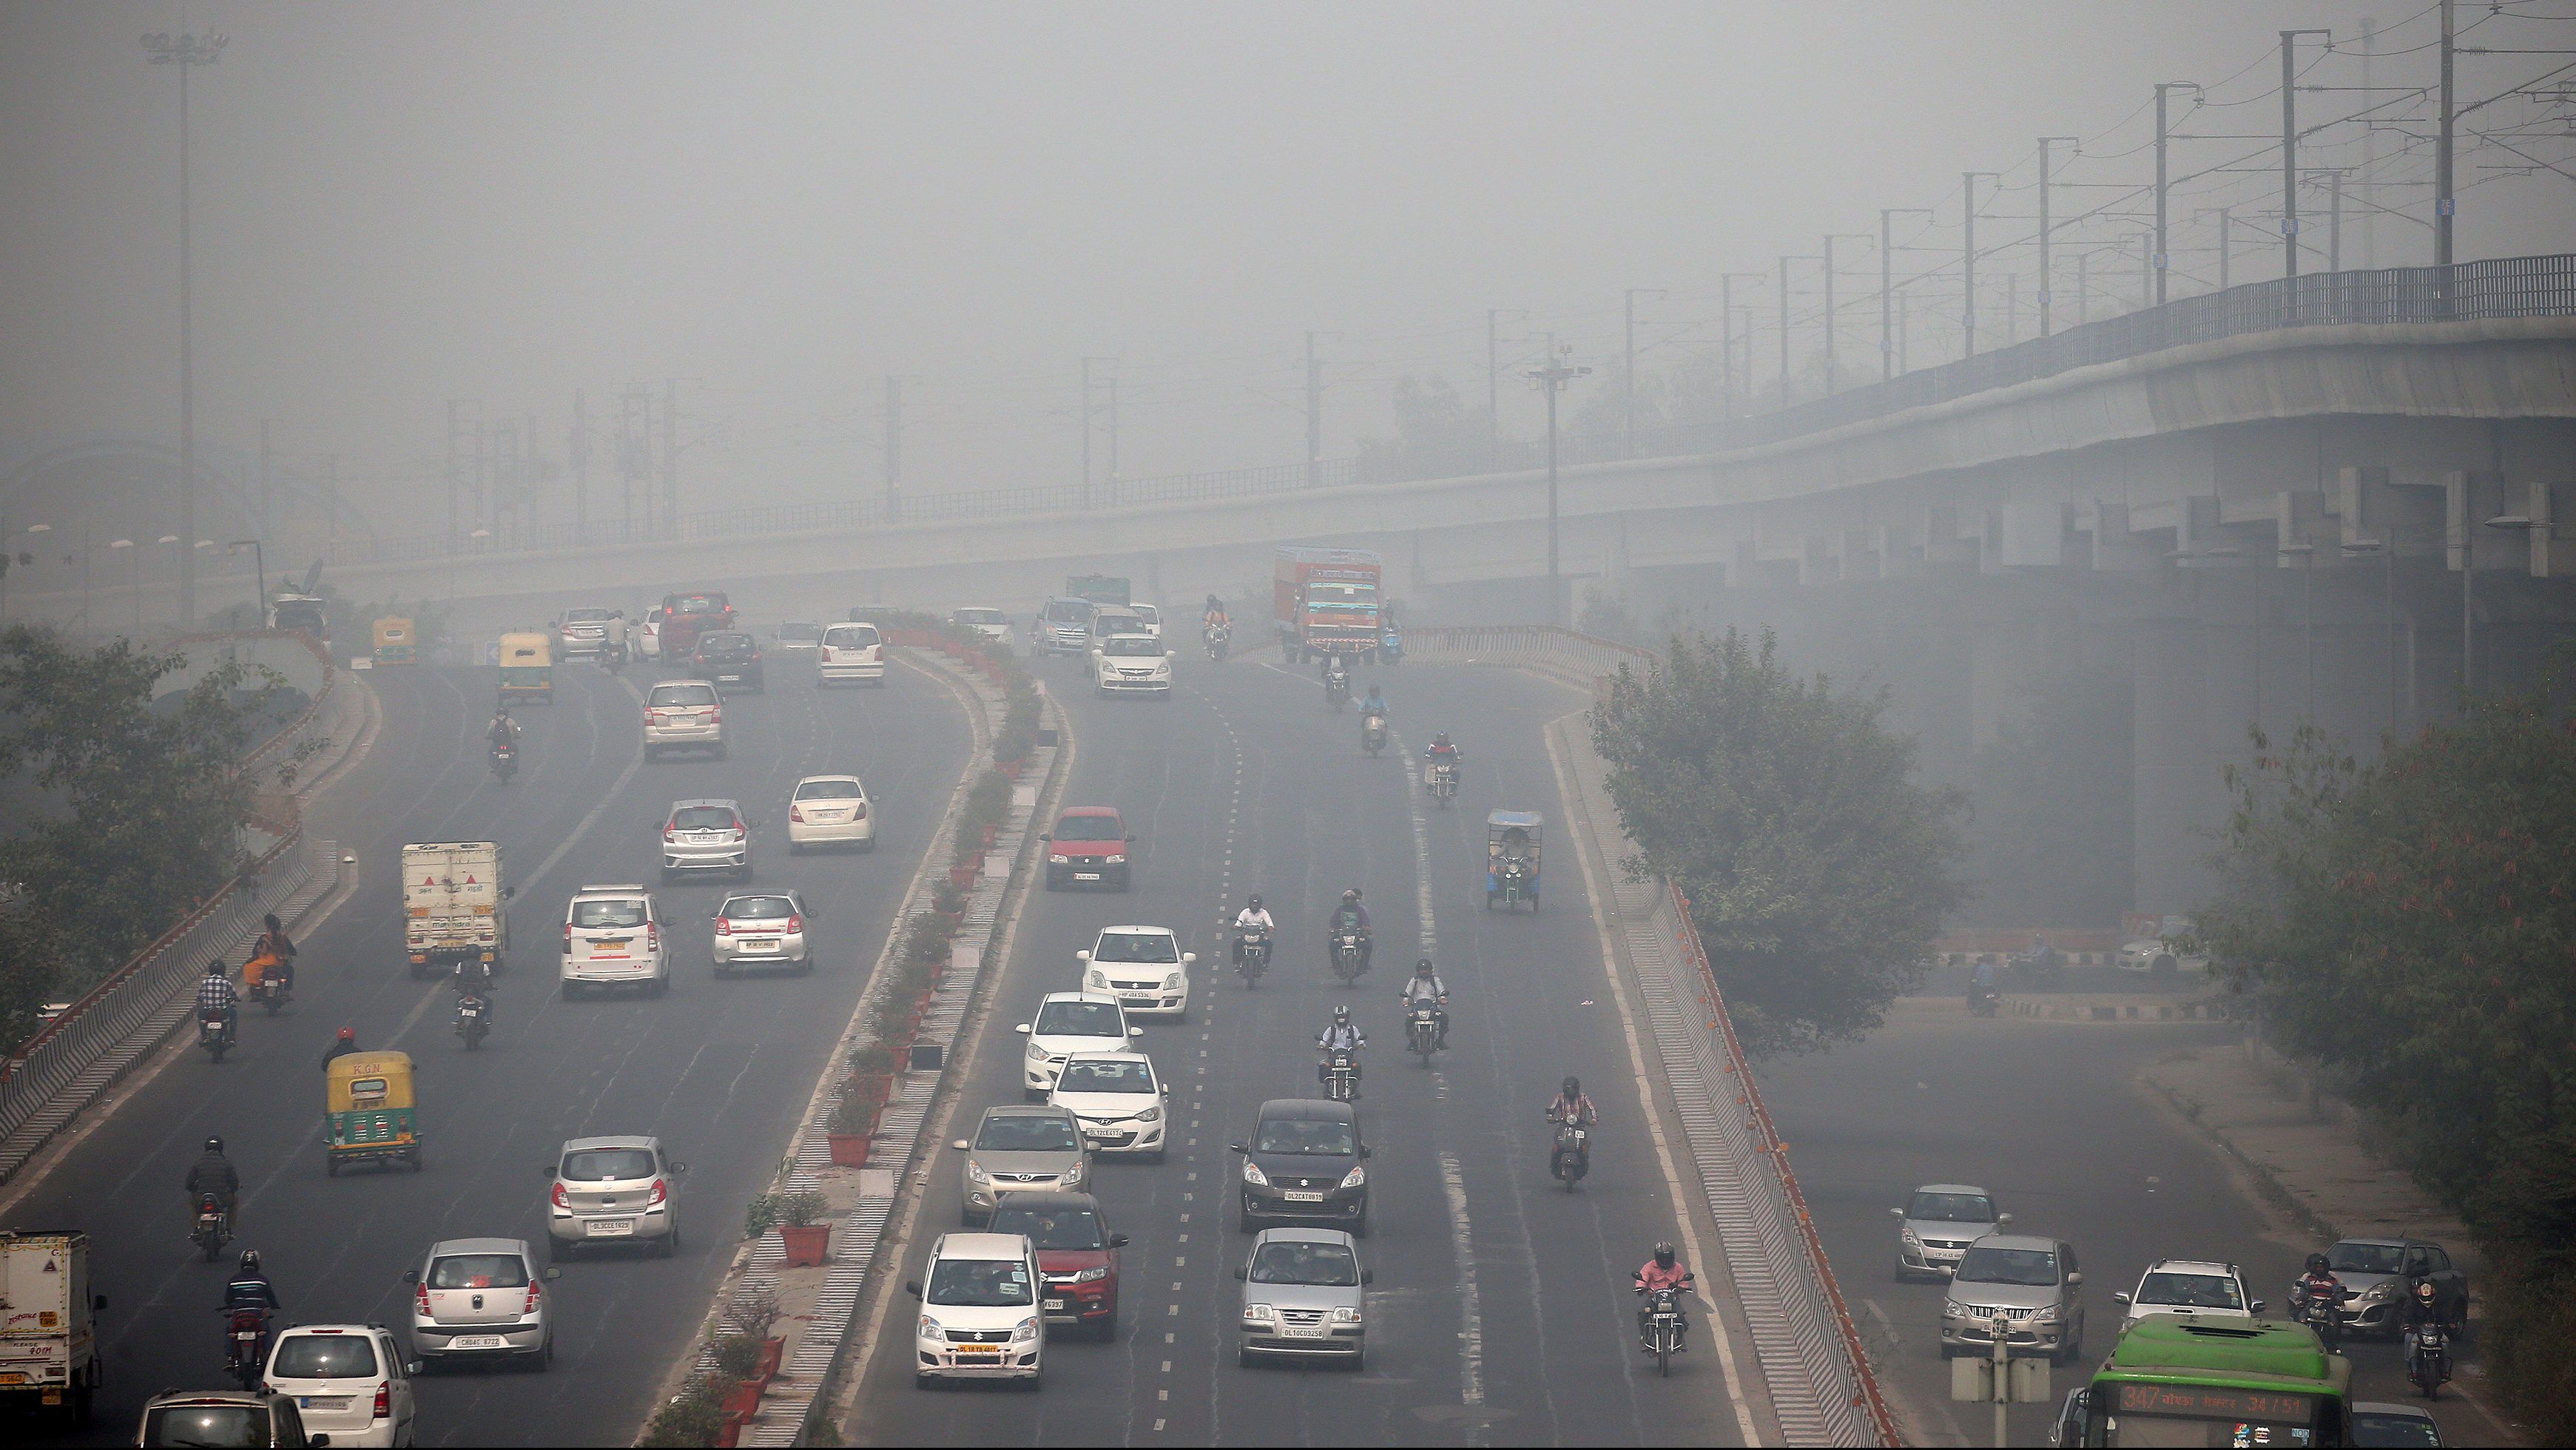 Air quality in Delhi deteriorated beyond the “severe” level: CPCB data